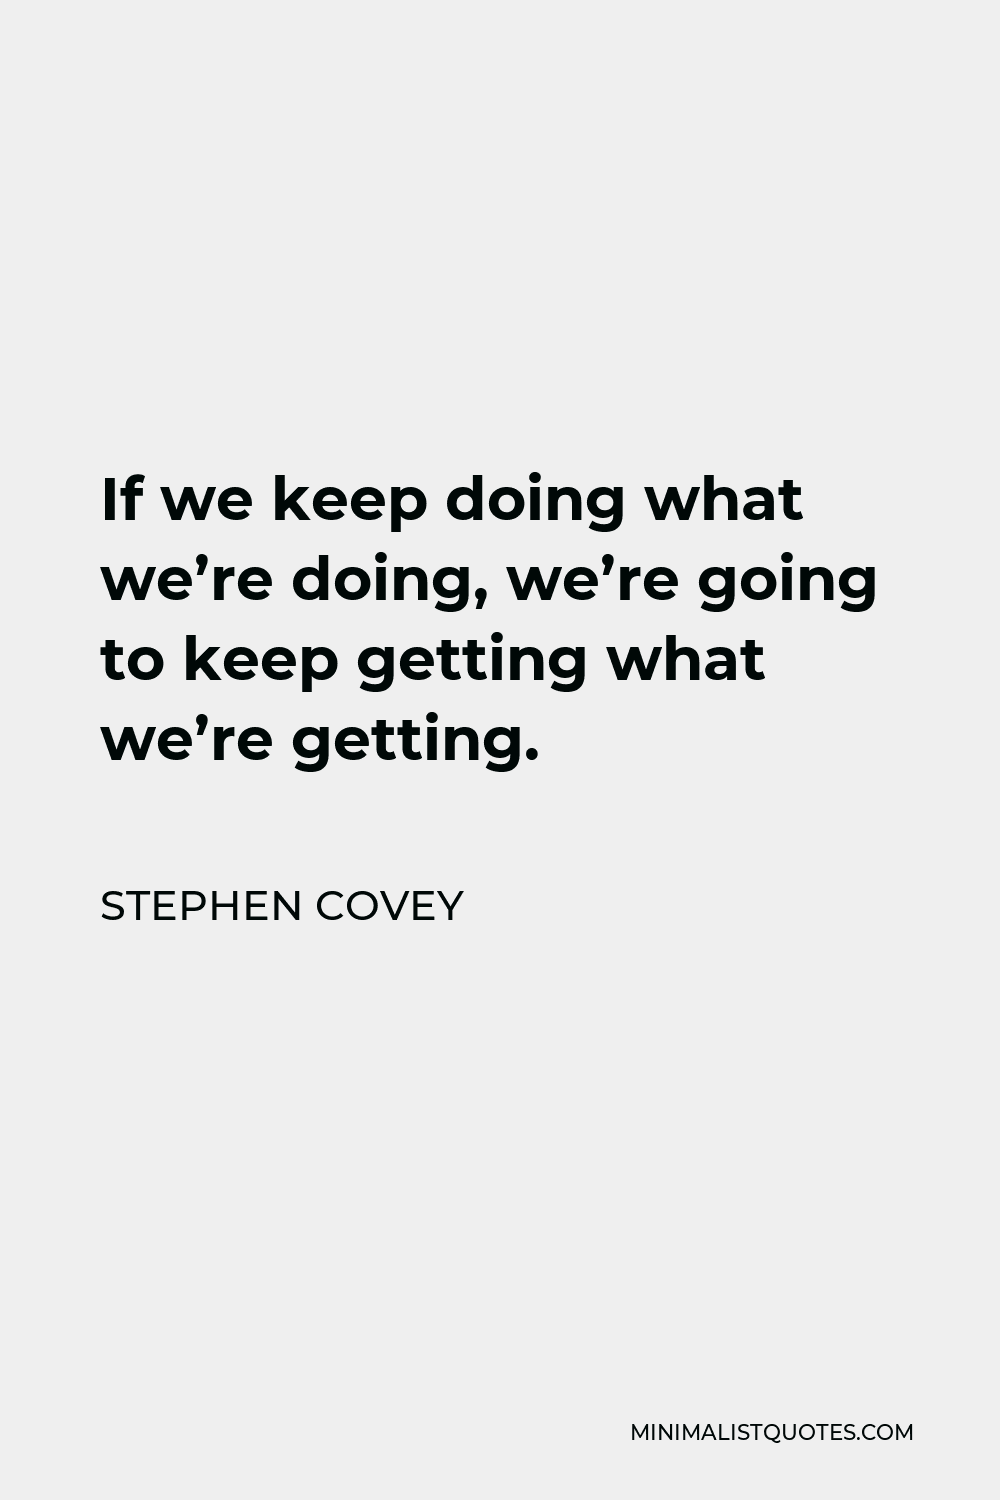 Stephen Covey Quote - If we keep doing what we’re doing, we’re going to keep getting what we’re getting.